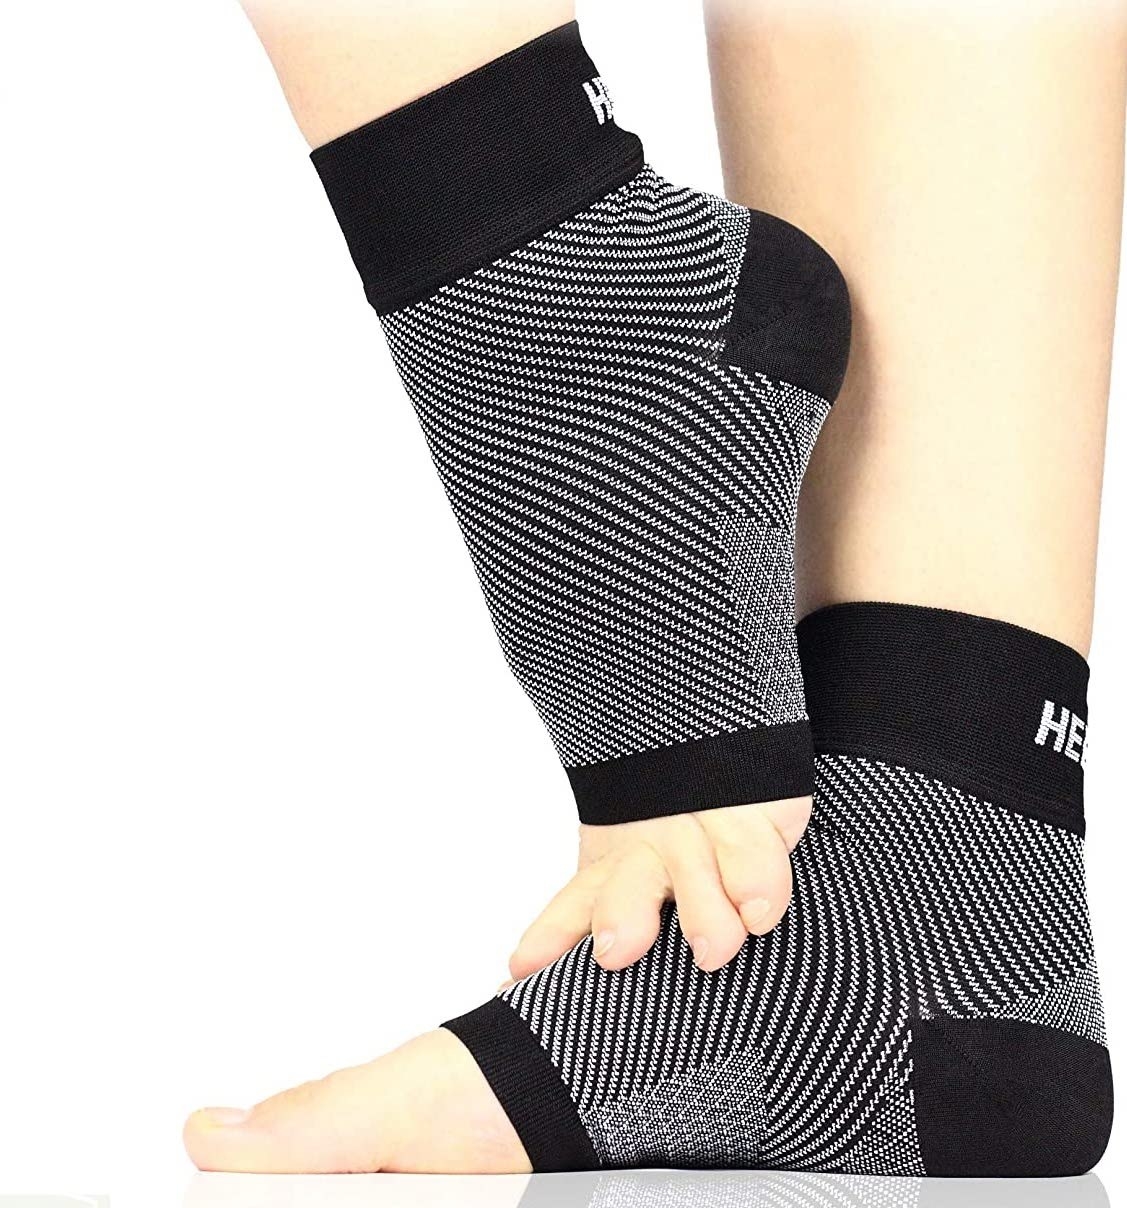 A close-up photo of the compression sleeves on a pair of feet